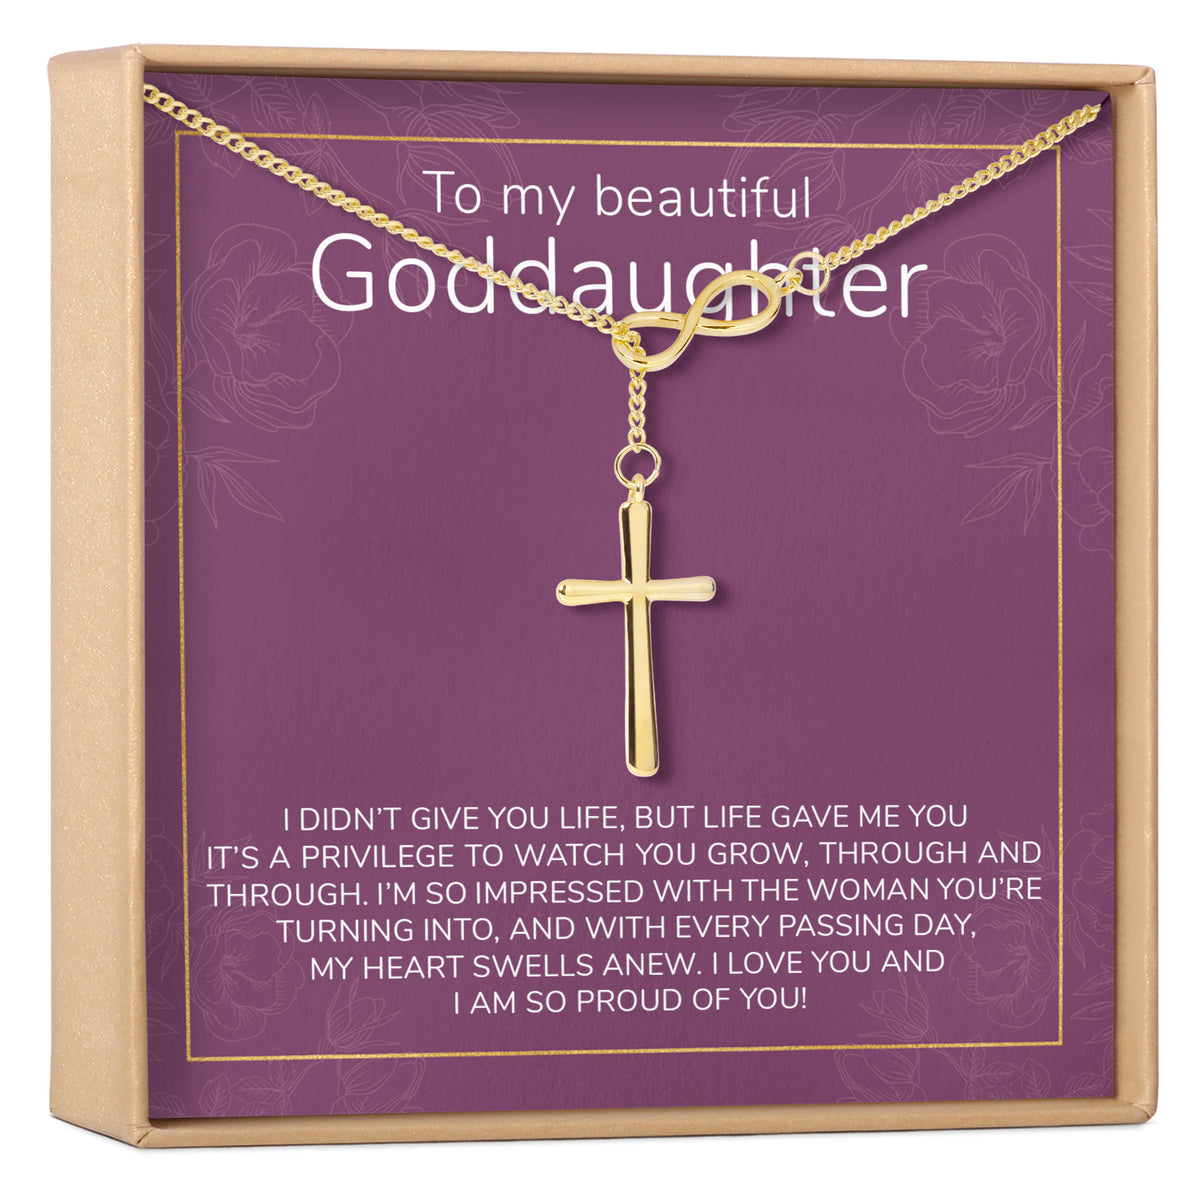 Goddaughter Necklace, Multiple Styles